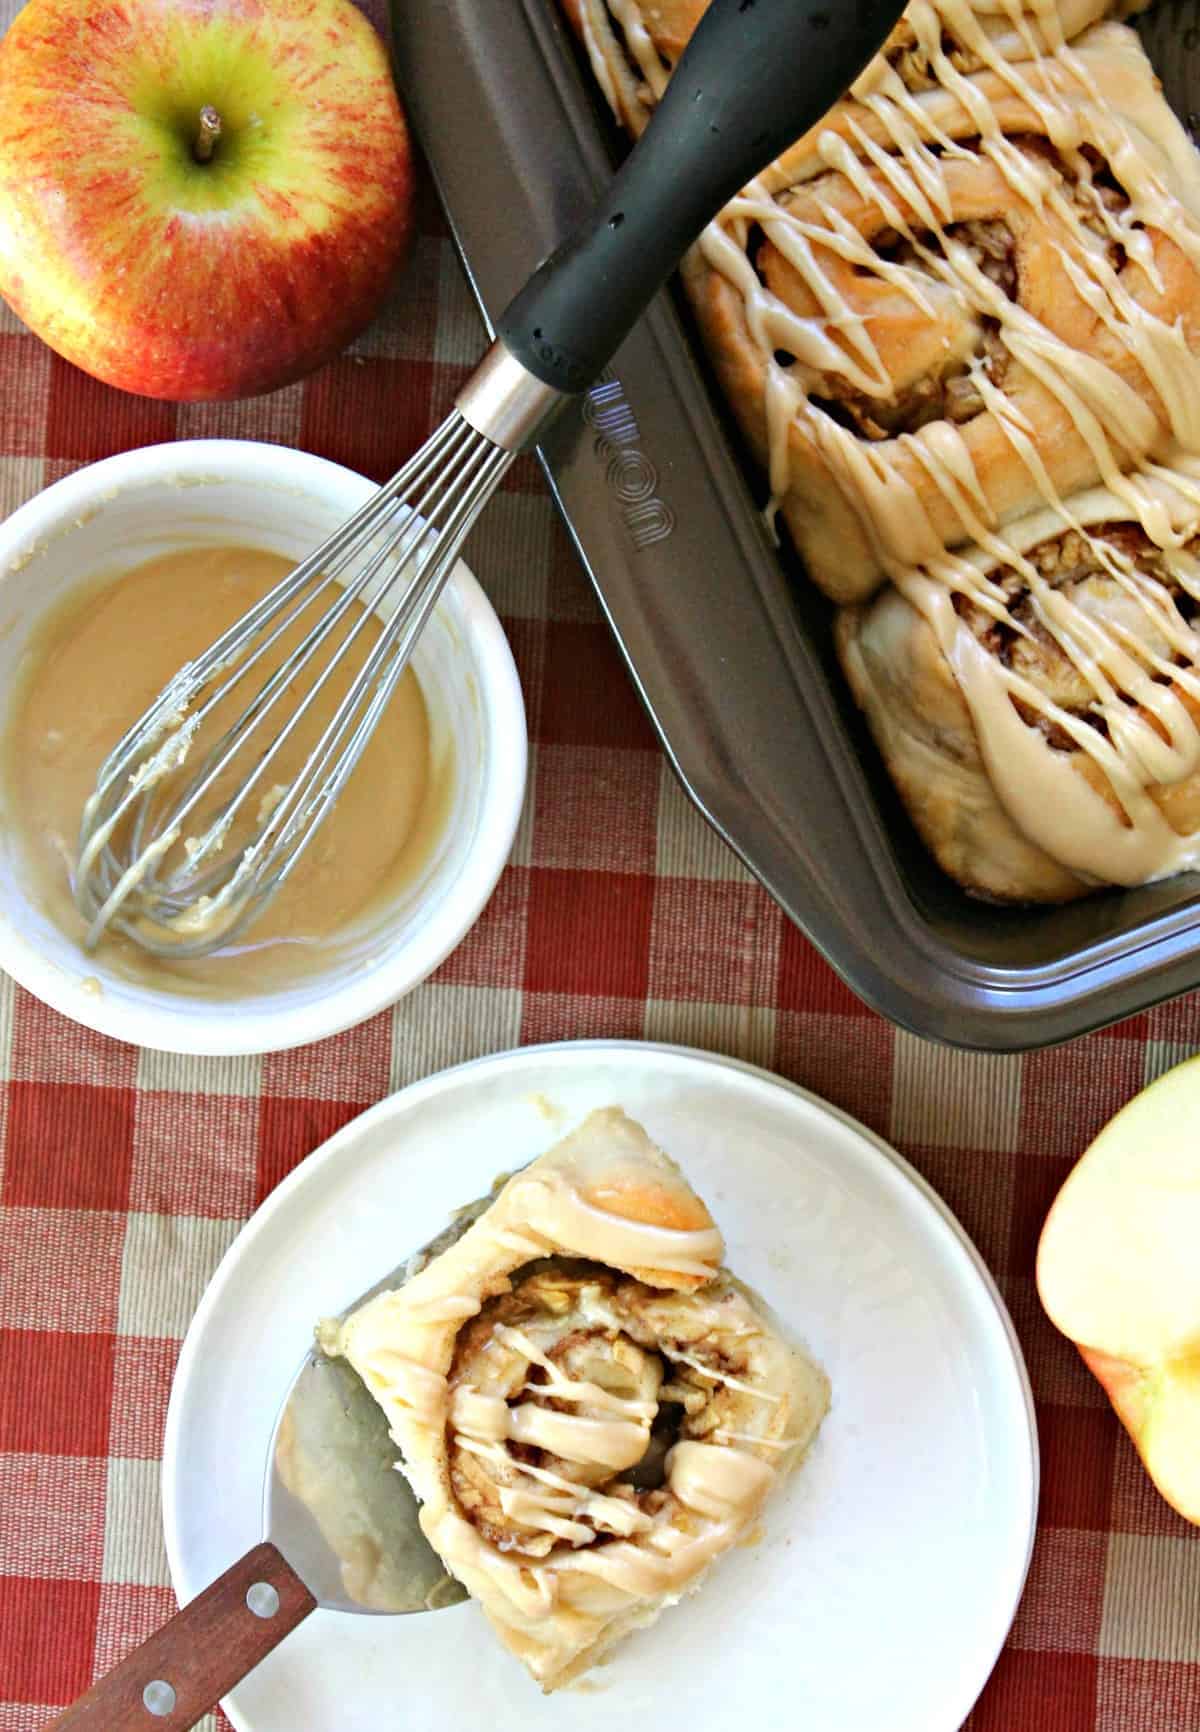 Soft and gooey caramel apple cinnamon rolls are topped with a homemade vanilla glaze and packed with sweet apples and pecans